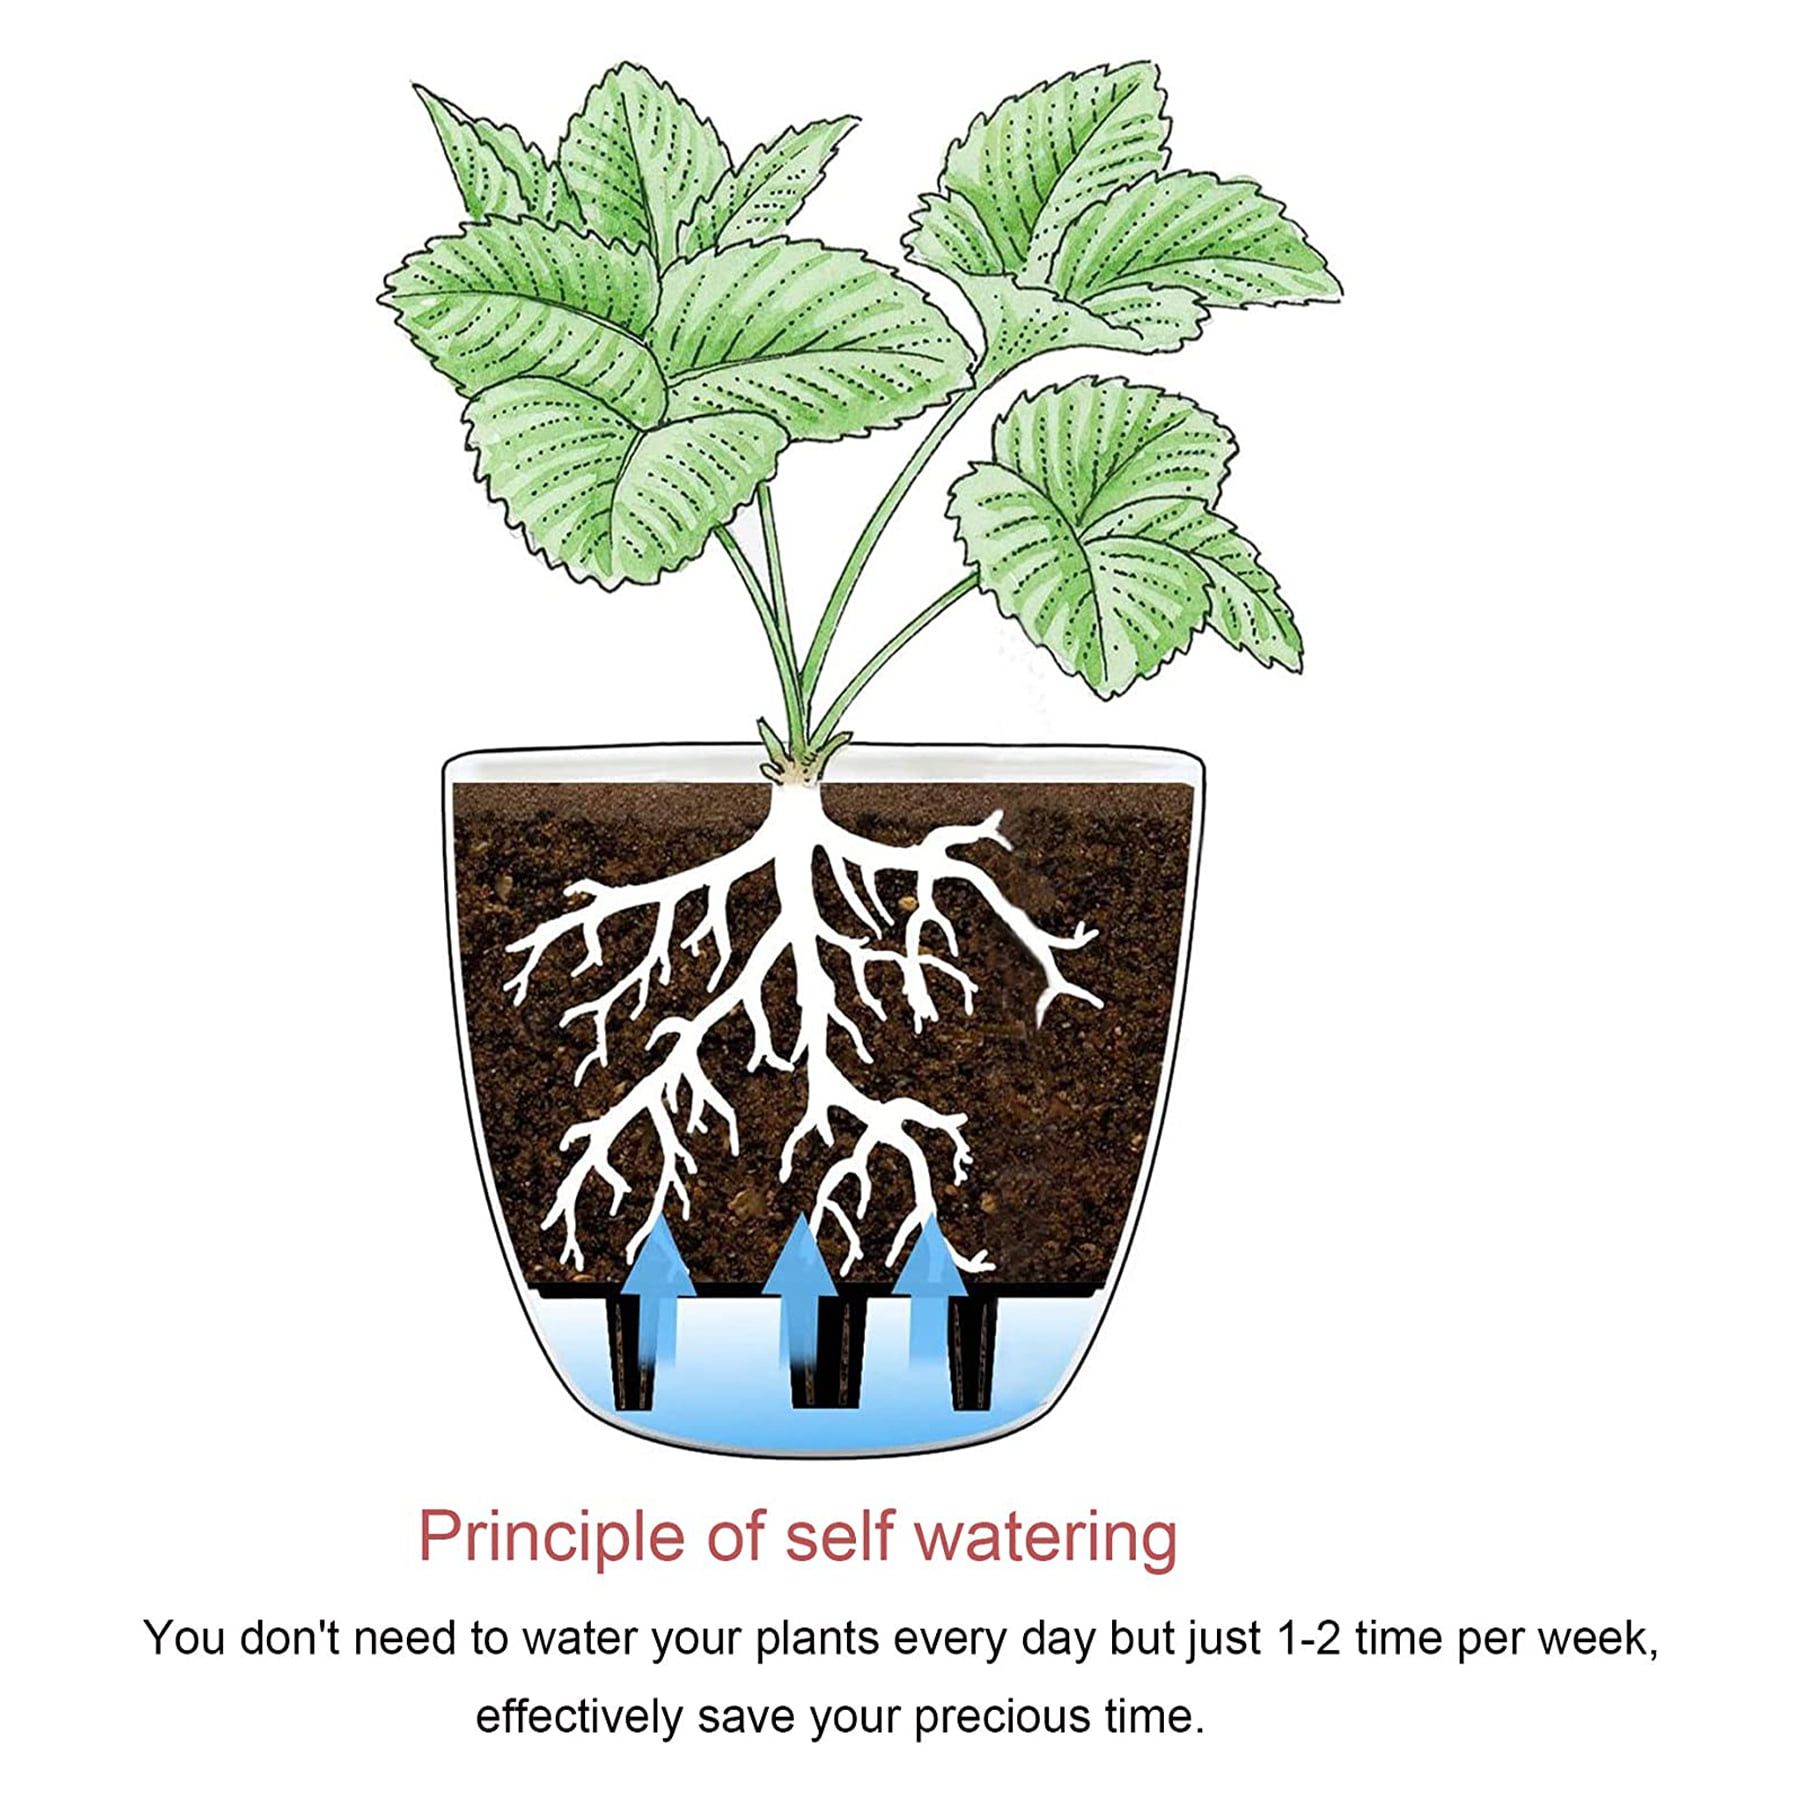 how to set up a self-watering plant straw system - The Plant Project